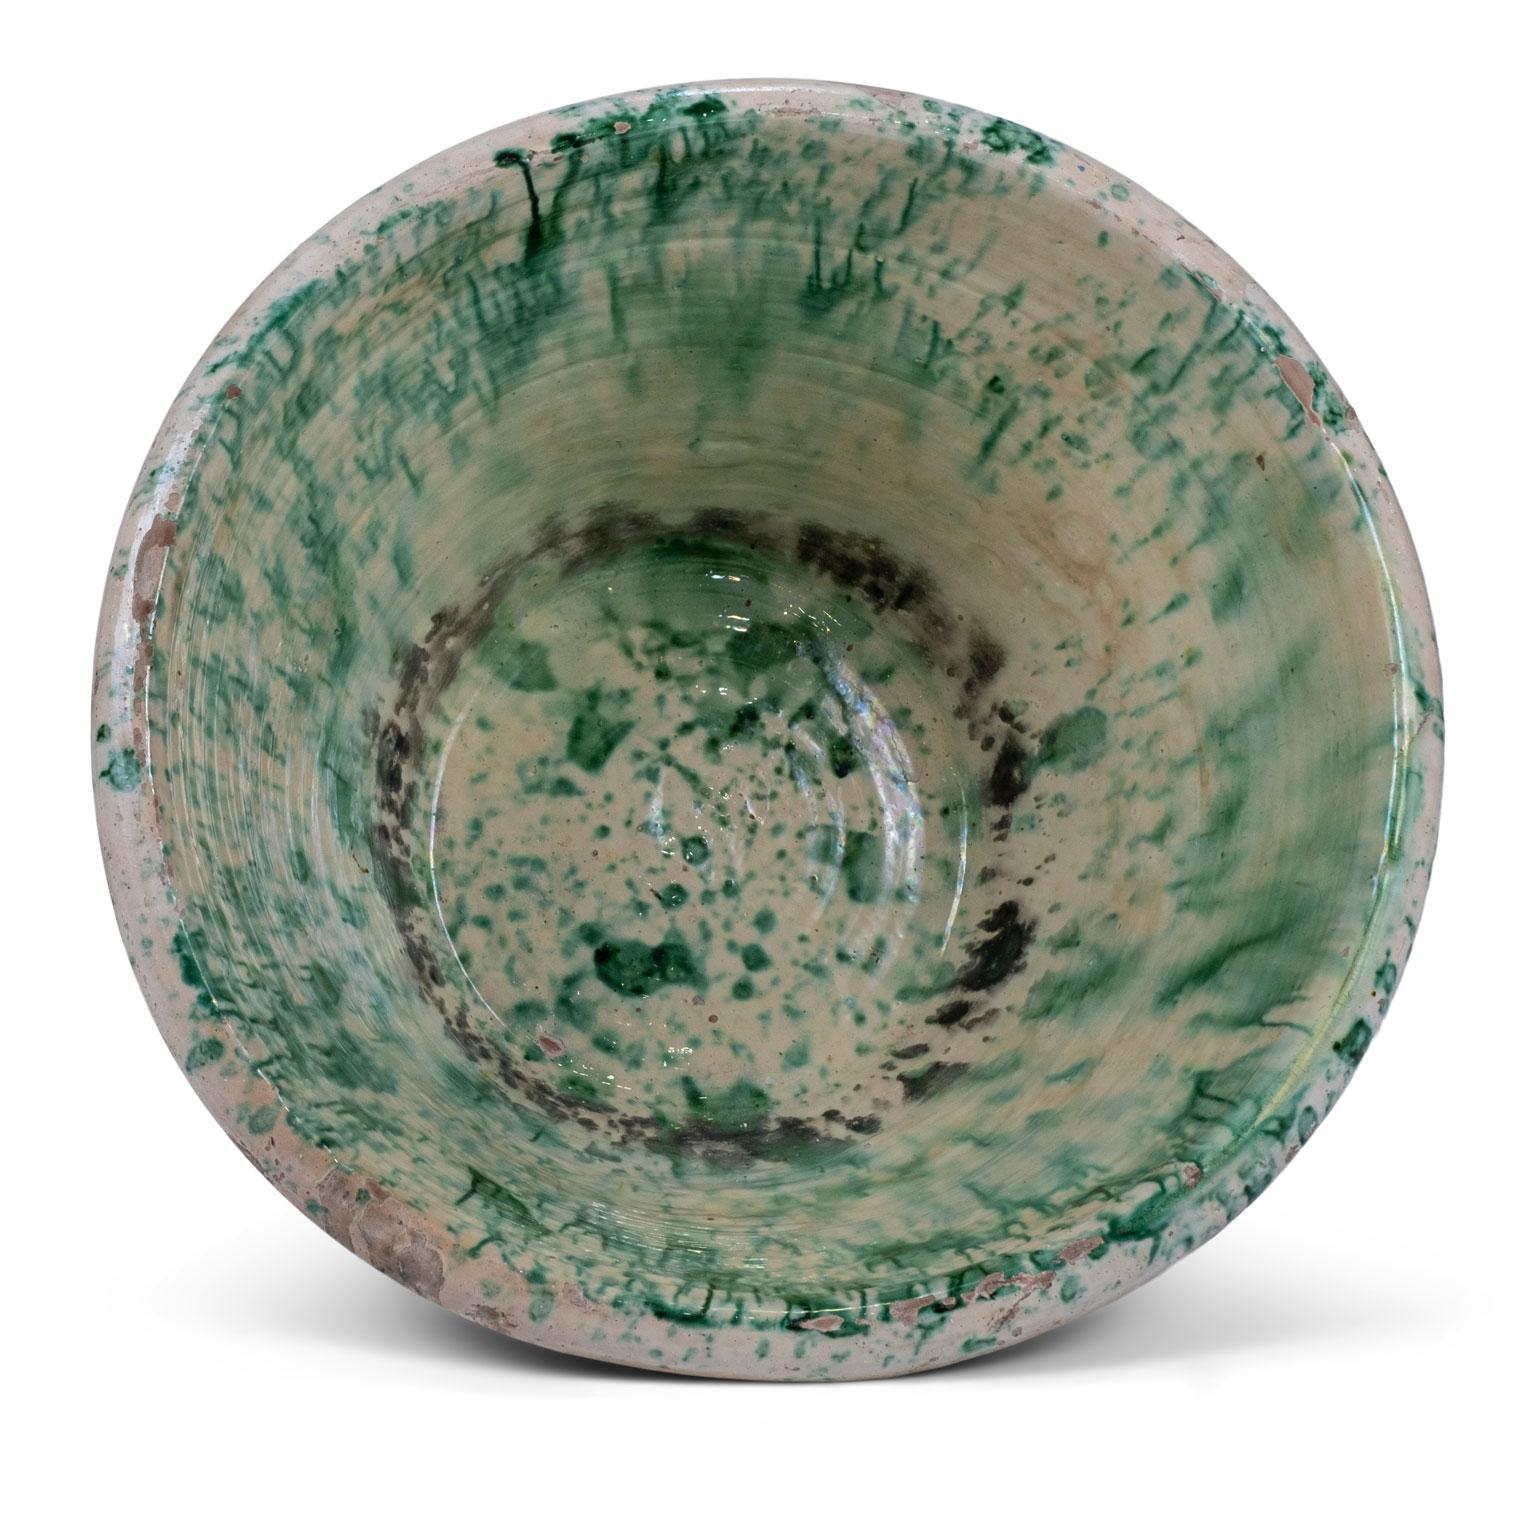 Colorful glazed terracotta passata bowl from Southern Italy (Puglia). This rustic 19th century terracotta bowl was used in the Italian countryside to make tomato passata. Handcrafted and glazed in a pesto-color green pattern over butter-cream.